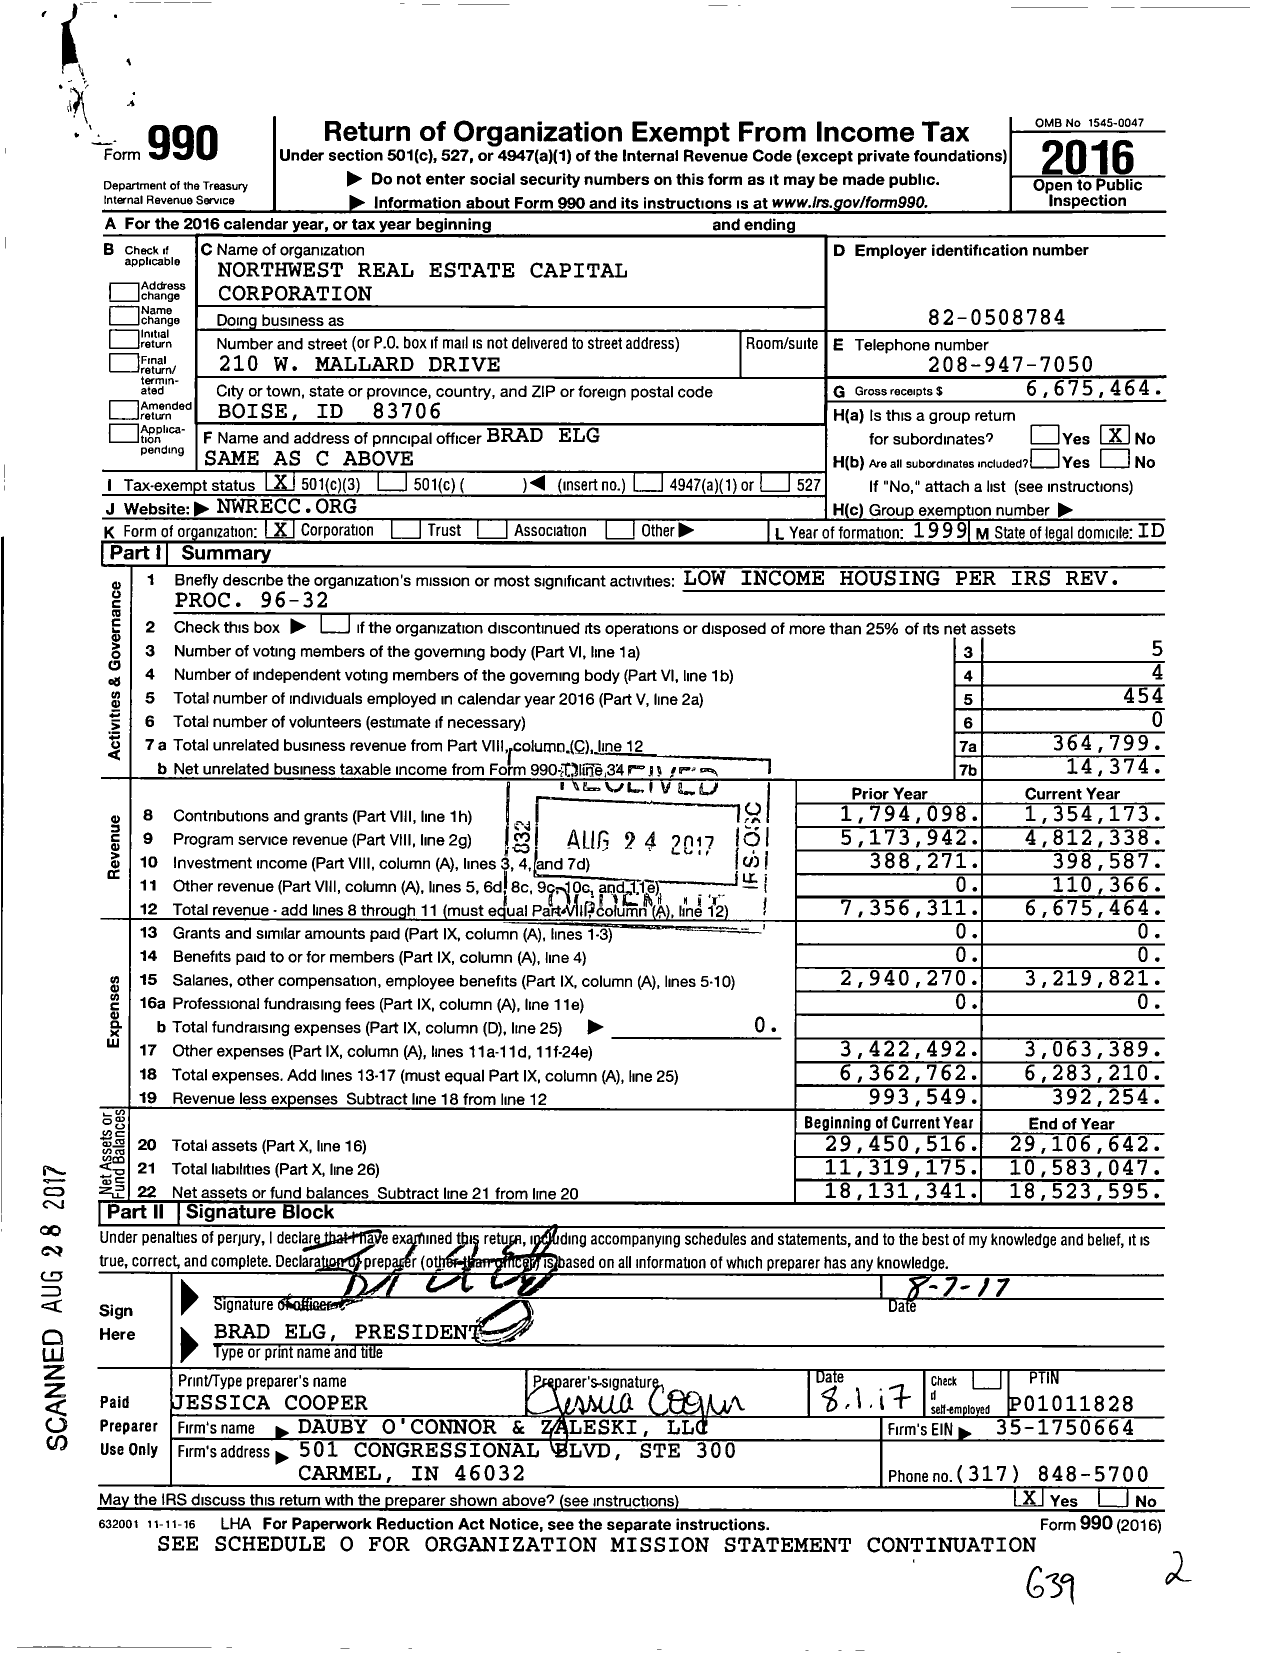 Image of first page of 2016 Form 990 for Northwest Real Estate Capital Corporation (NWRECC)